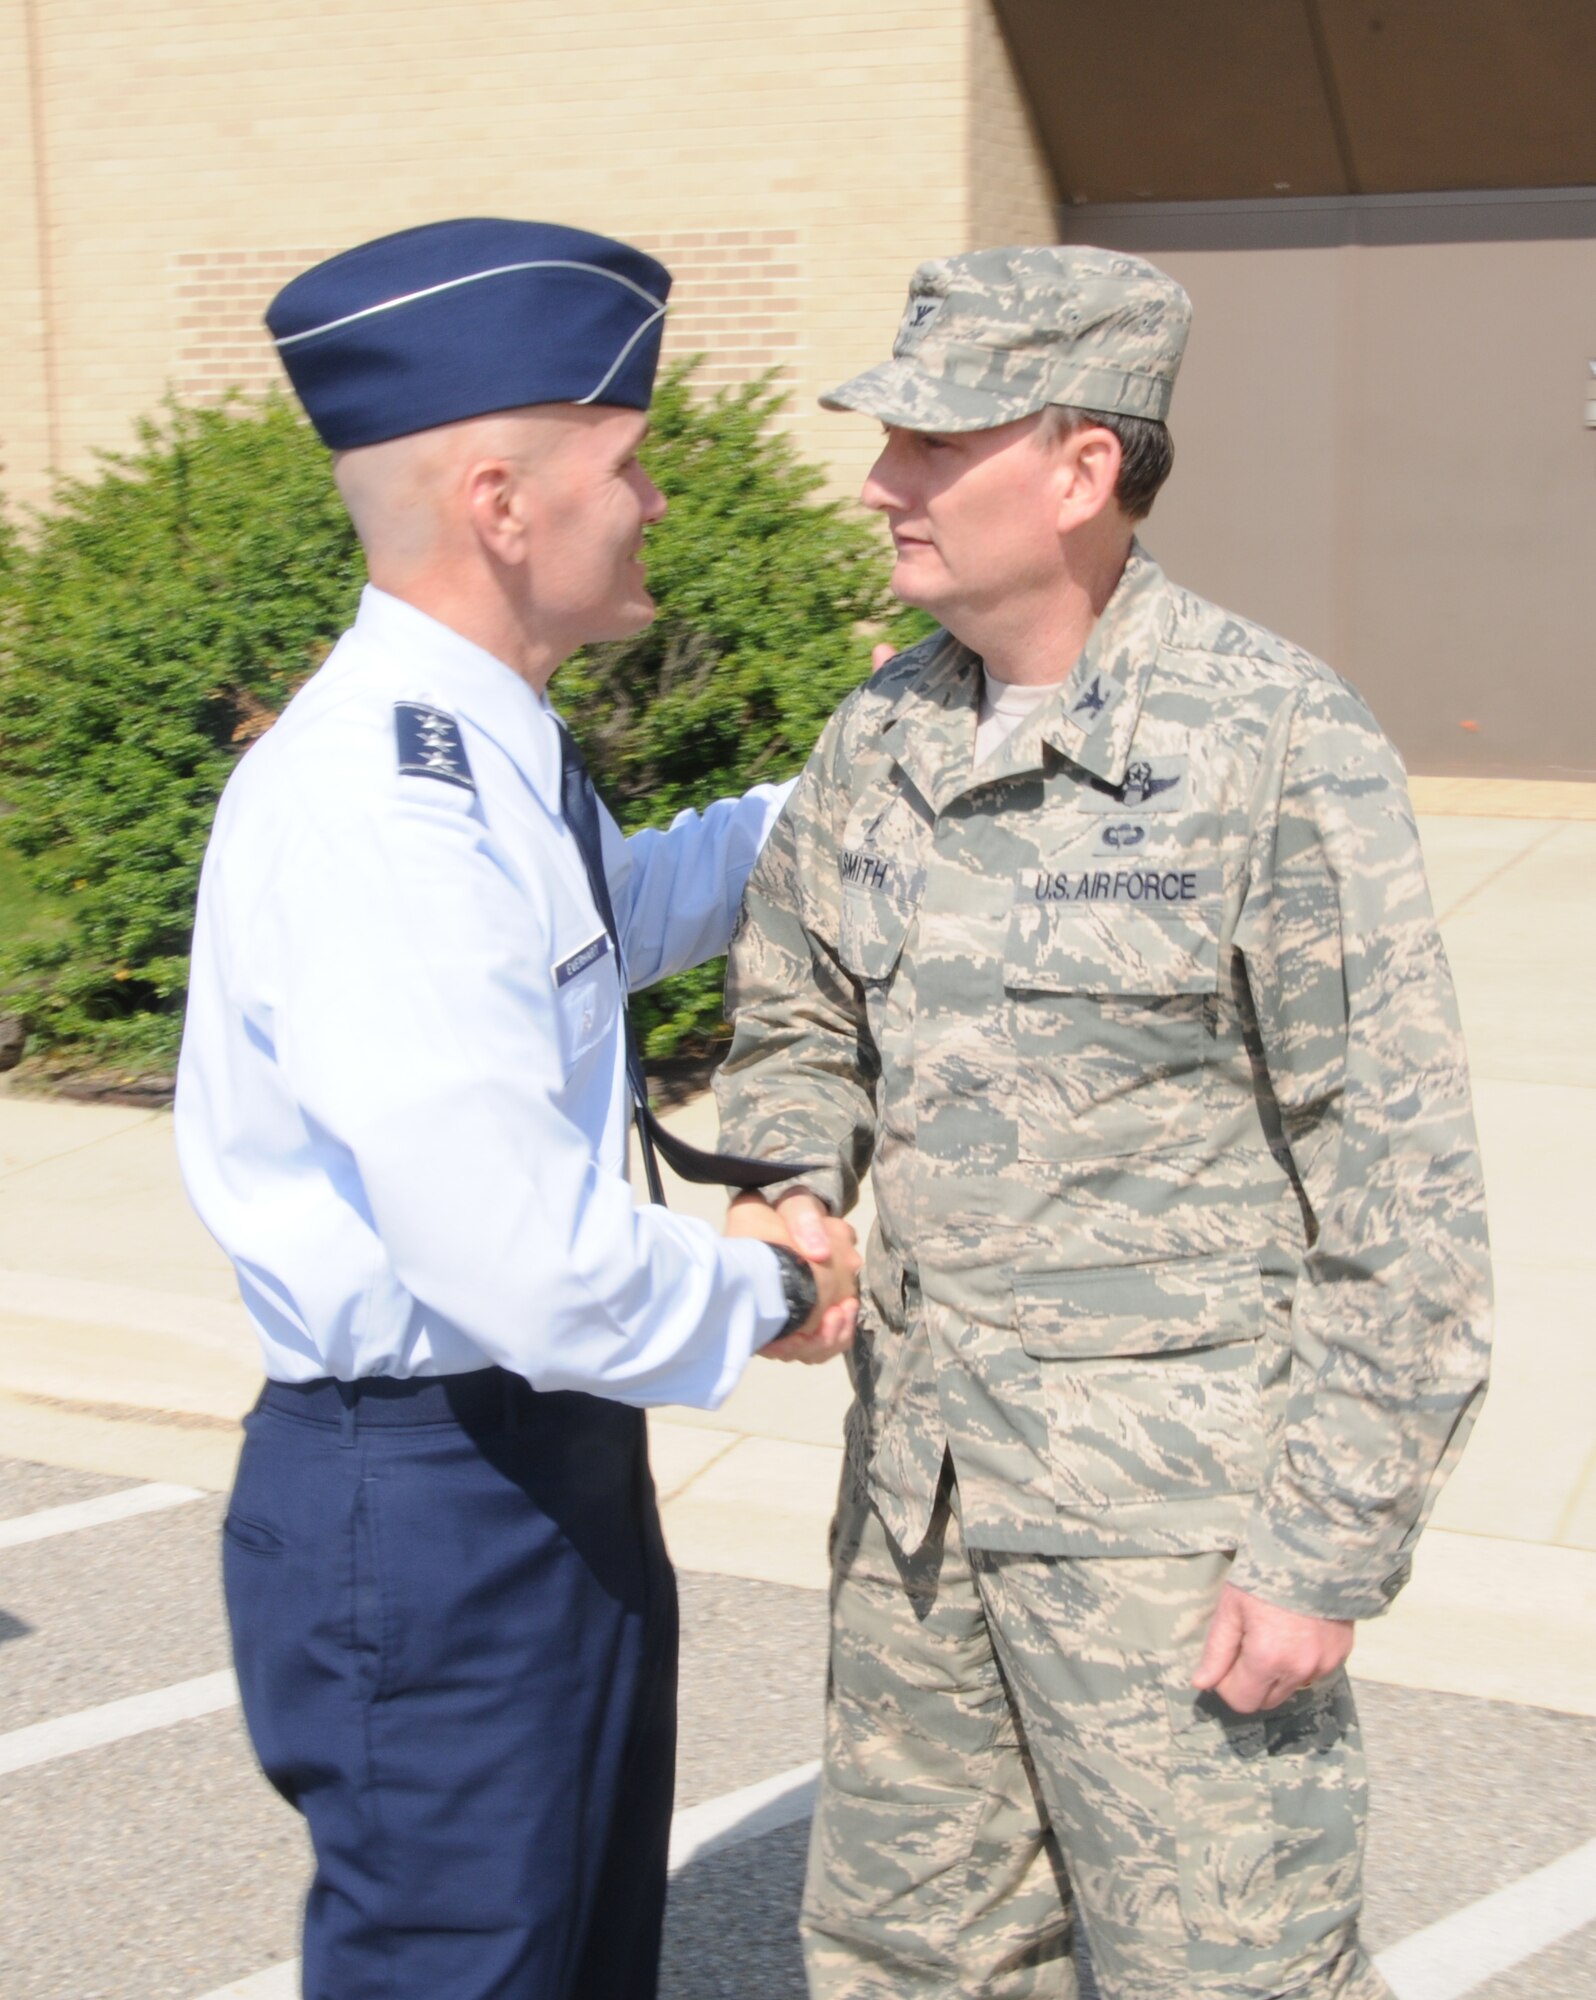 Lt. Gen. Carlton D. Everhart II, 18th Air Force commander, is greeted by Col. Thomas K. Smith, Jr., 459th Air Refueling Wing commander, during Everhart's visit to 459 ARW on May 13, 2015. Lt. Gen. Everhart visited the unit as part of his base-wide visit at Joint Base Andrews, Md. (Air Force Photo / Maj. Tim Smith)